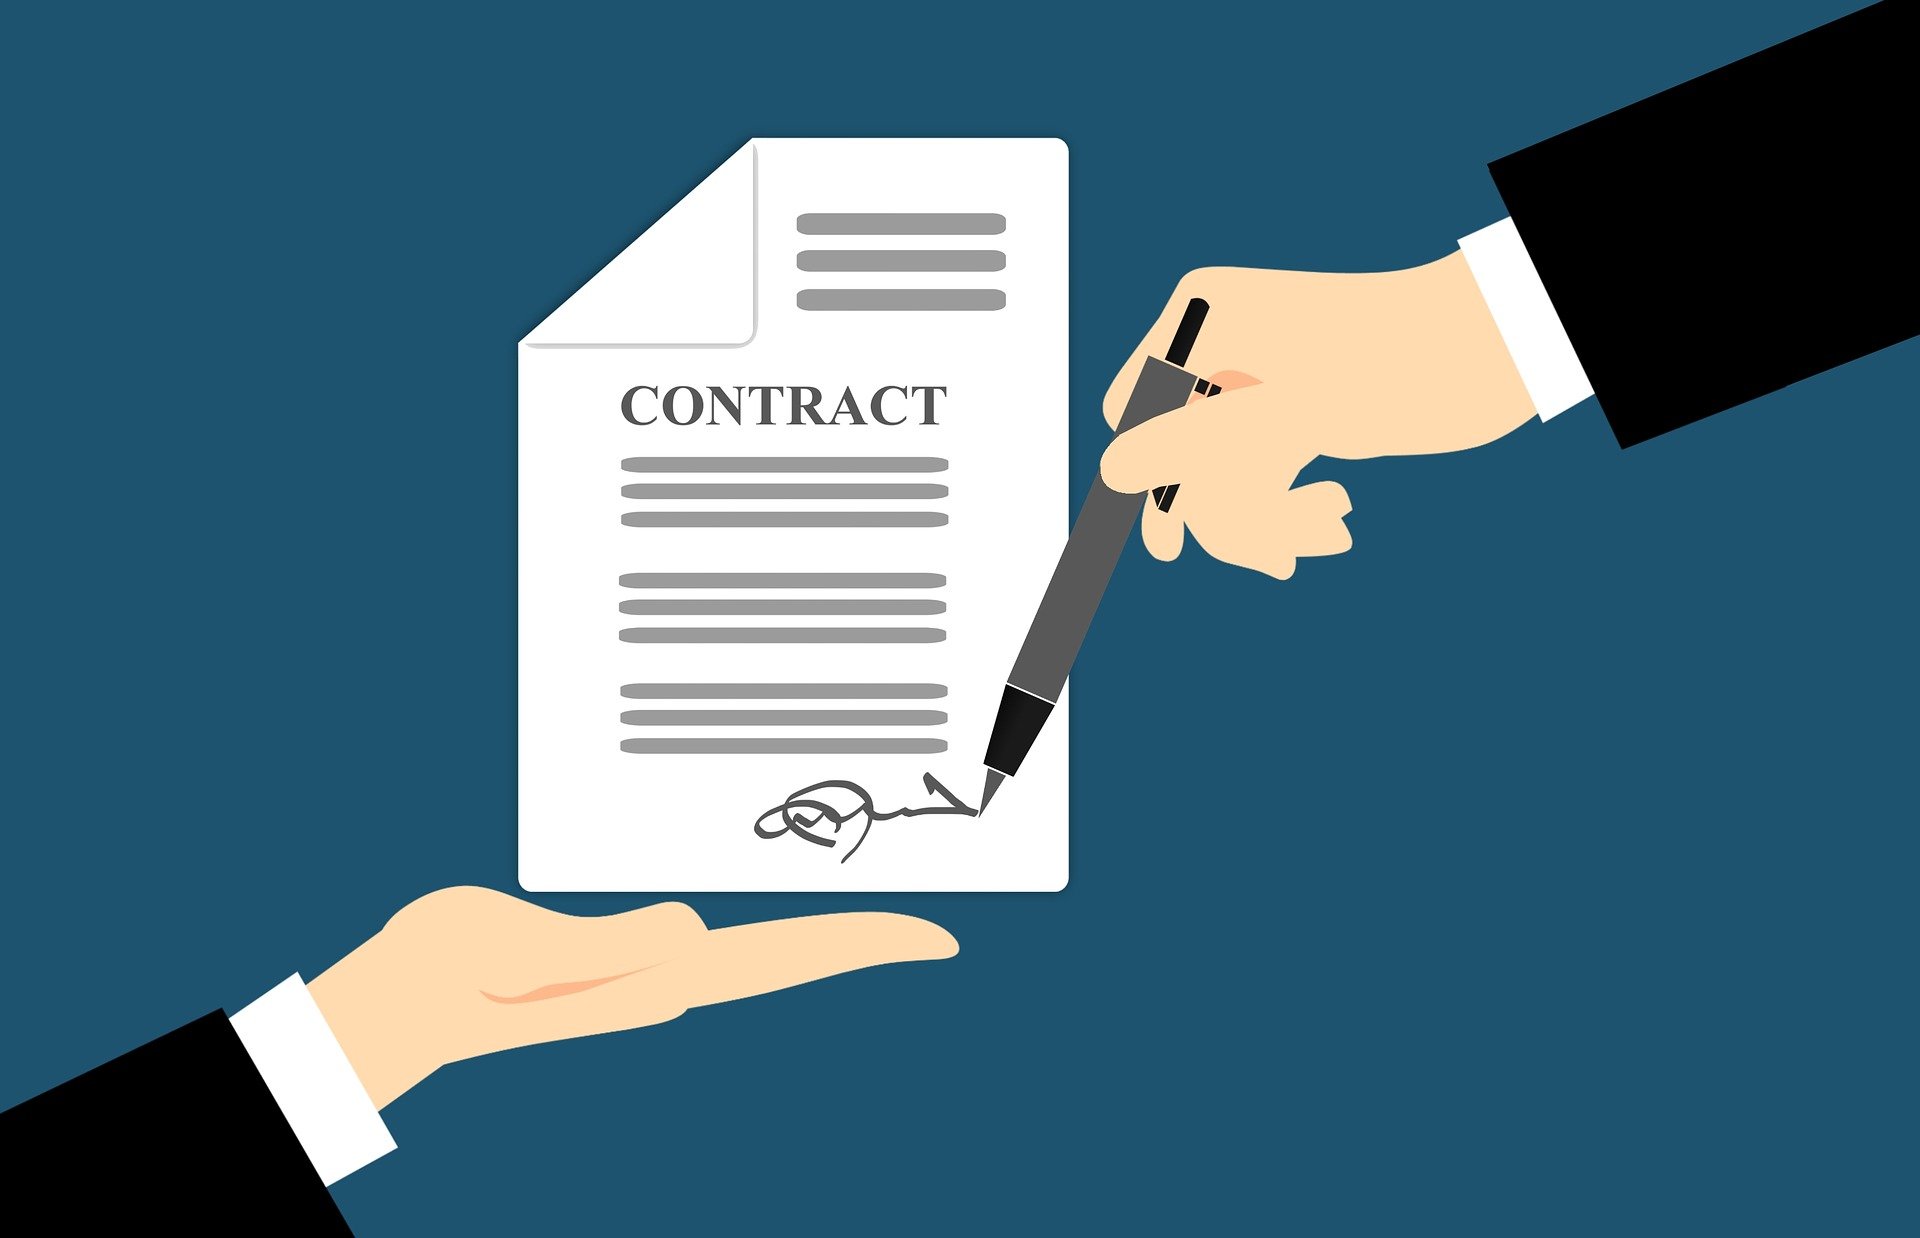 Graphic of man signing contract; image by Mohamed Hassan, via Pixabay.com.